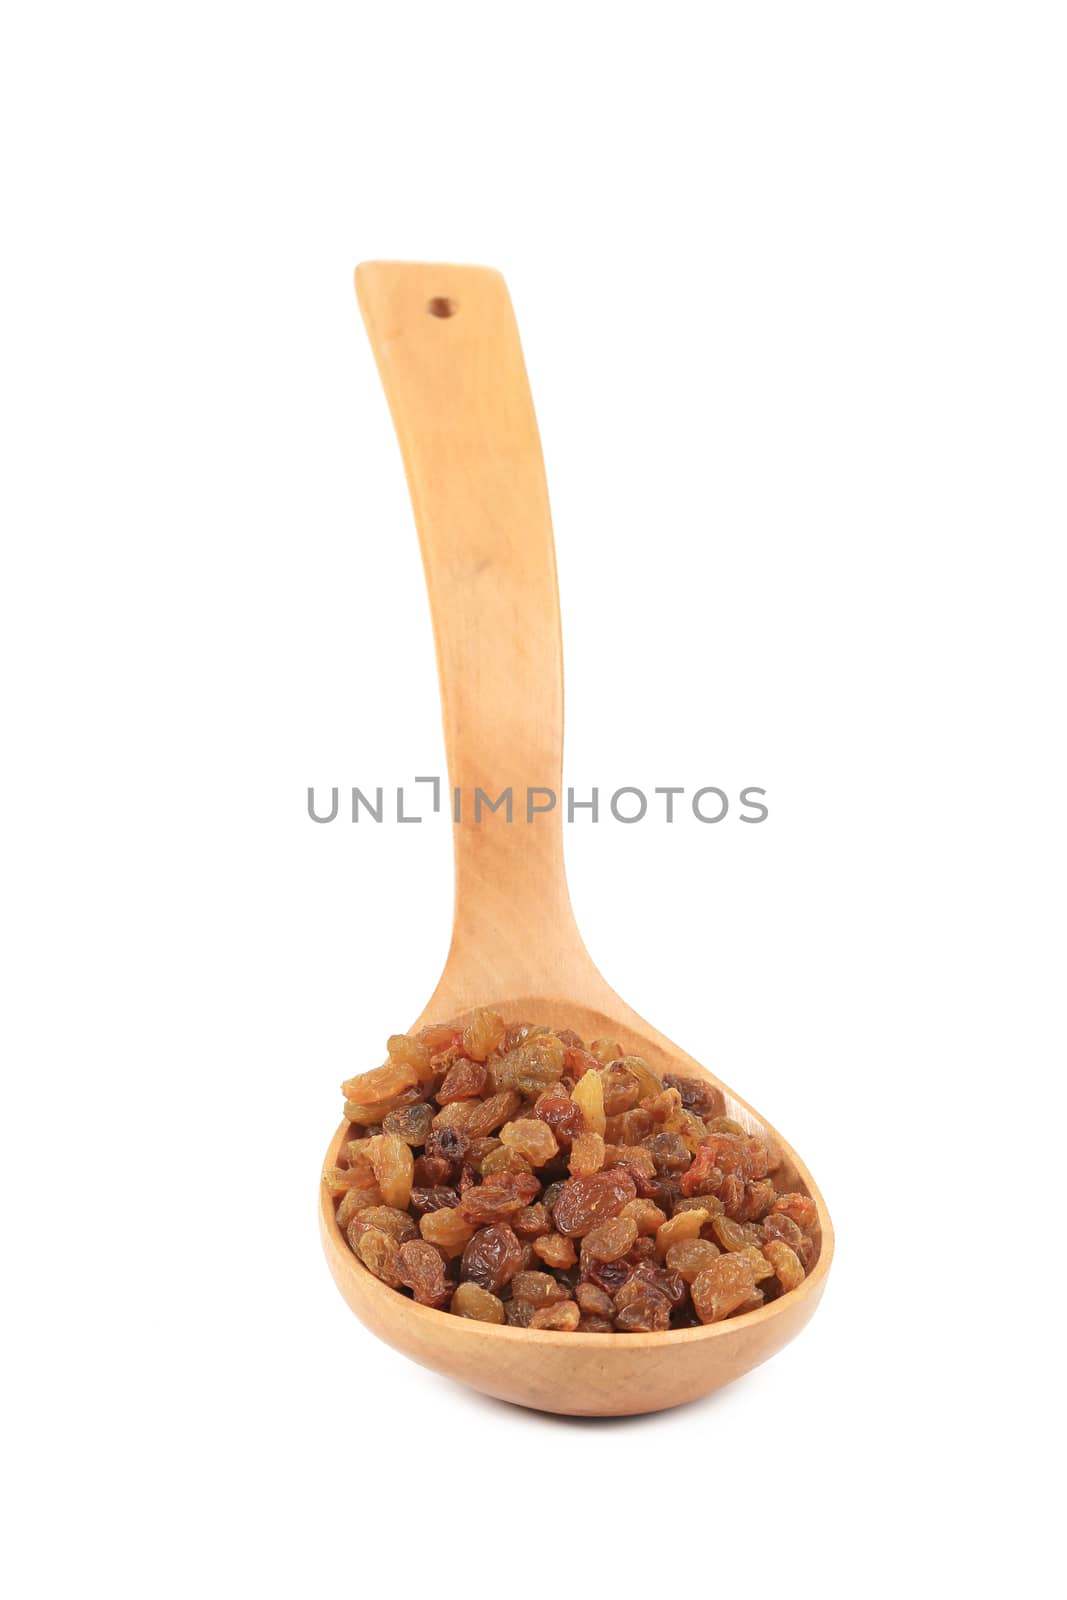 Wooden spoon with raisins. Isolated on a white background.